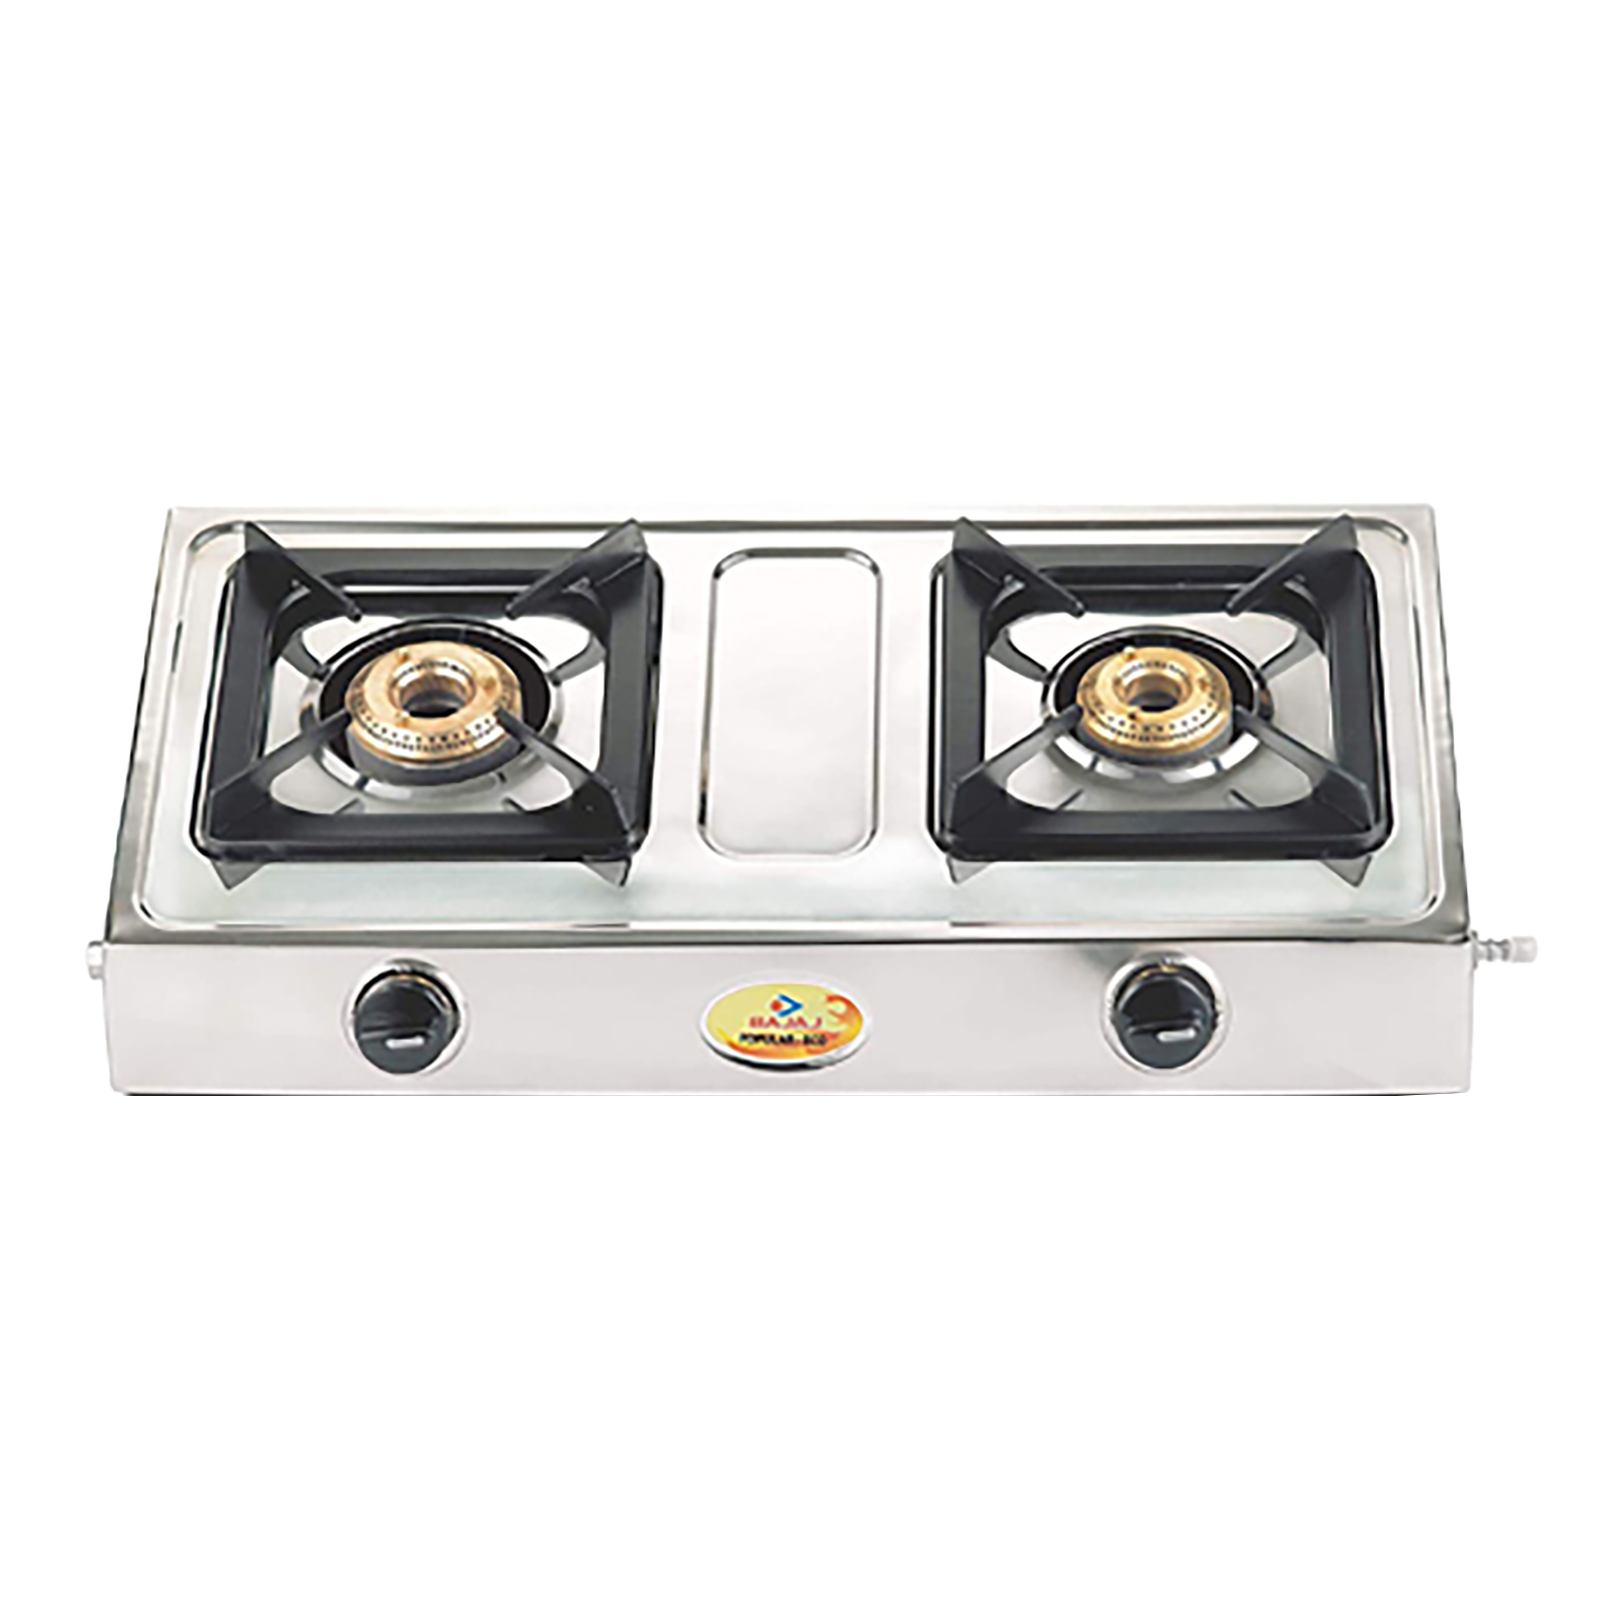 Bajaj 2BRSS6 2 Burner Stainless Steel Gas Stove (Unique SS Pan Support, Silver )_1